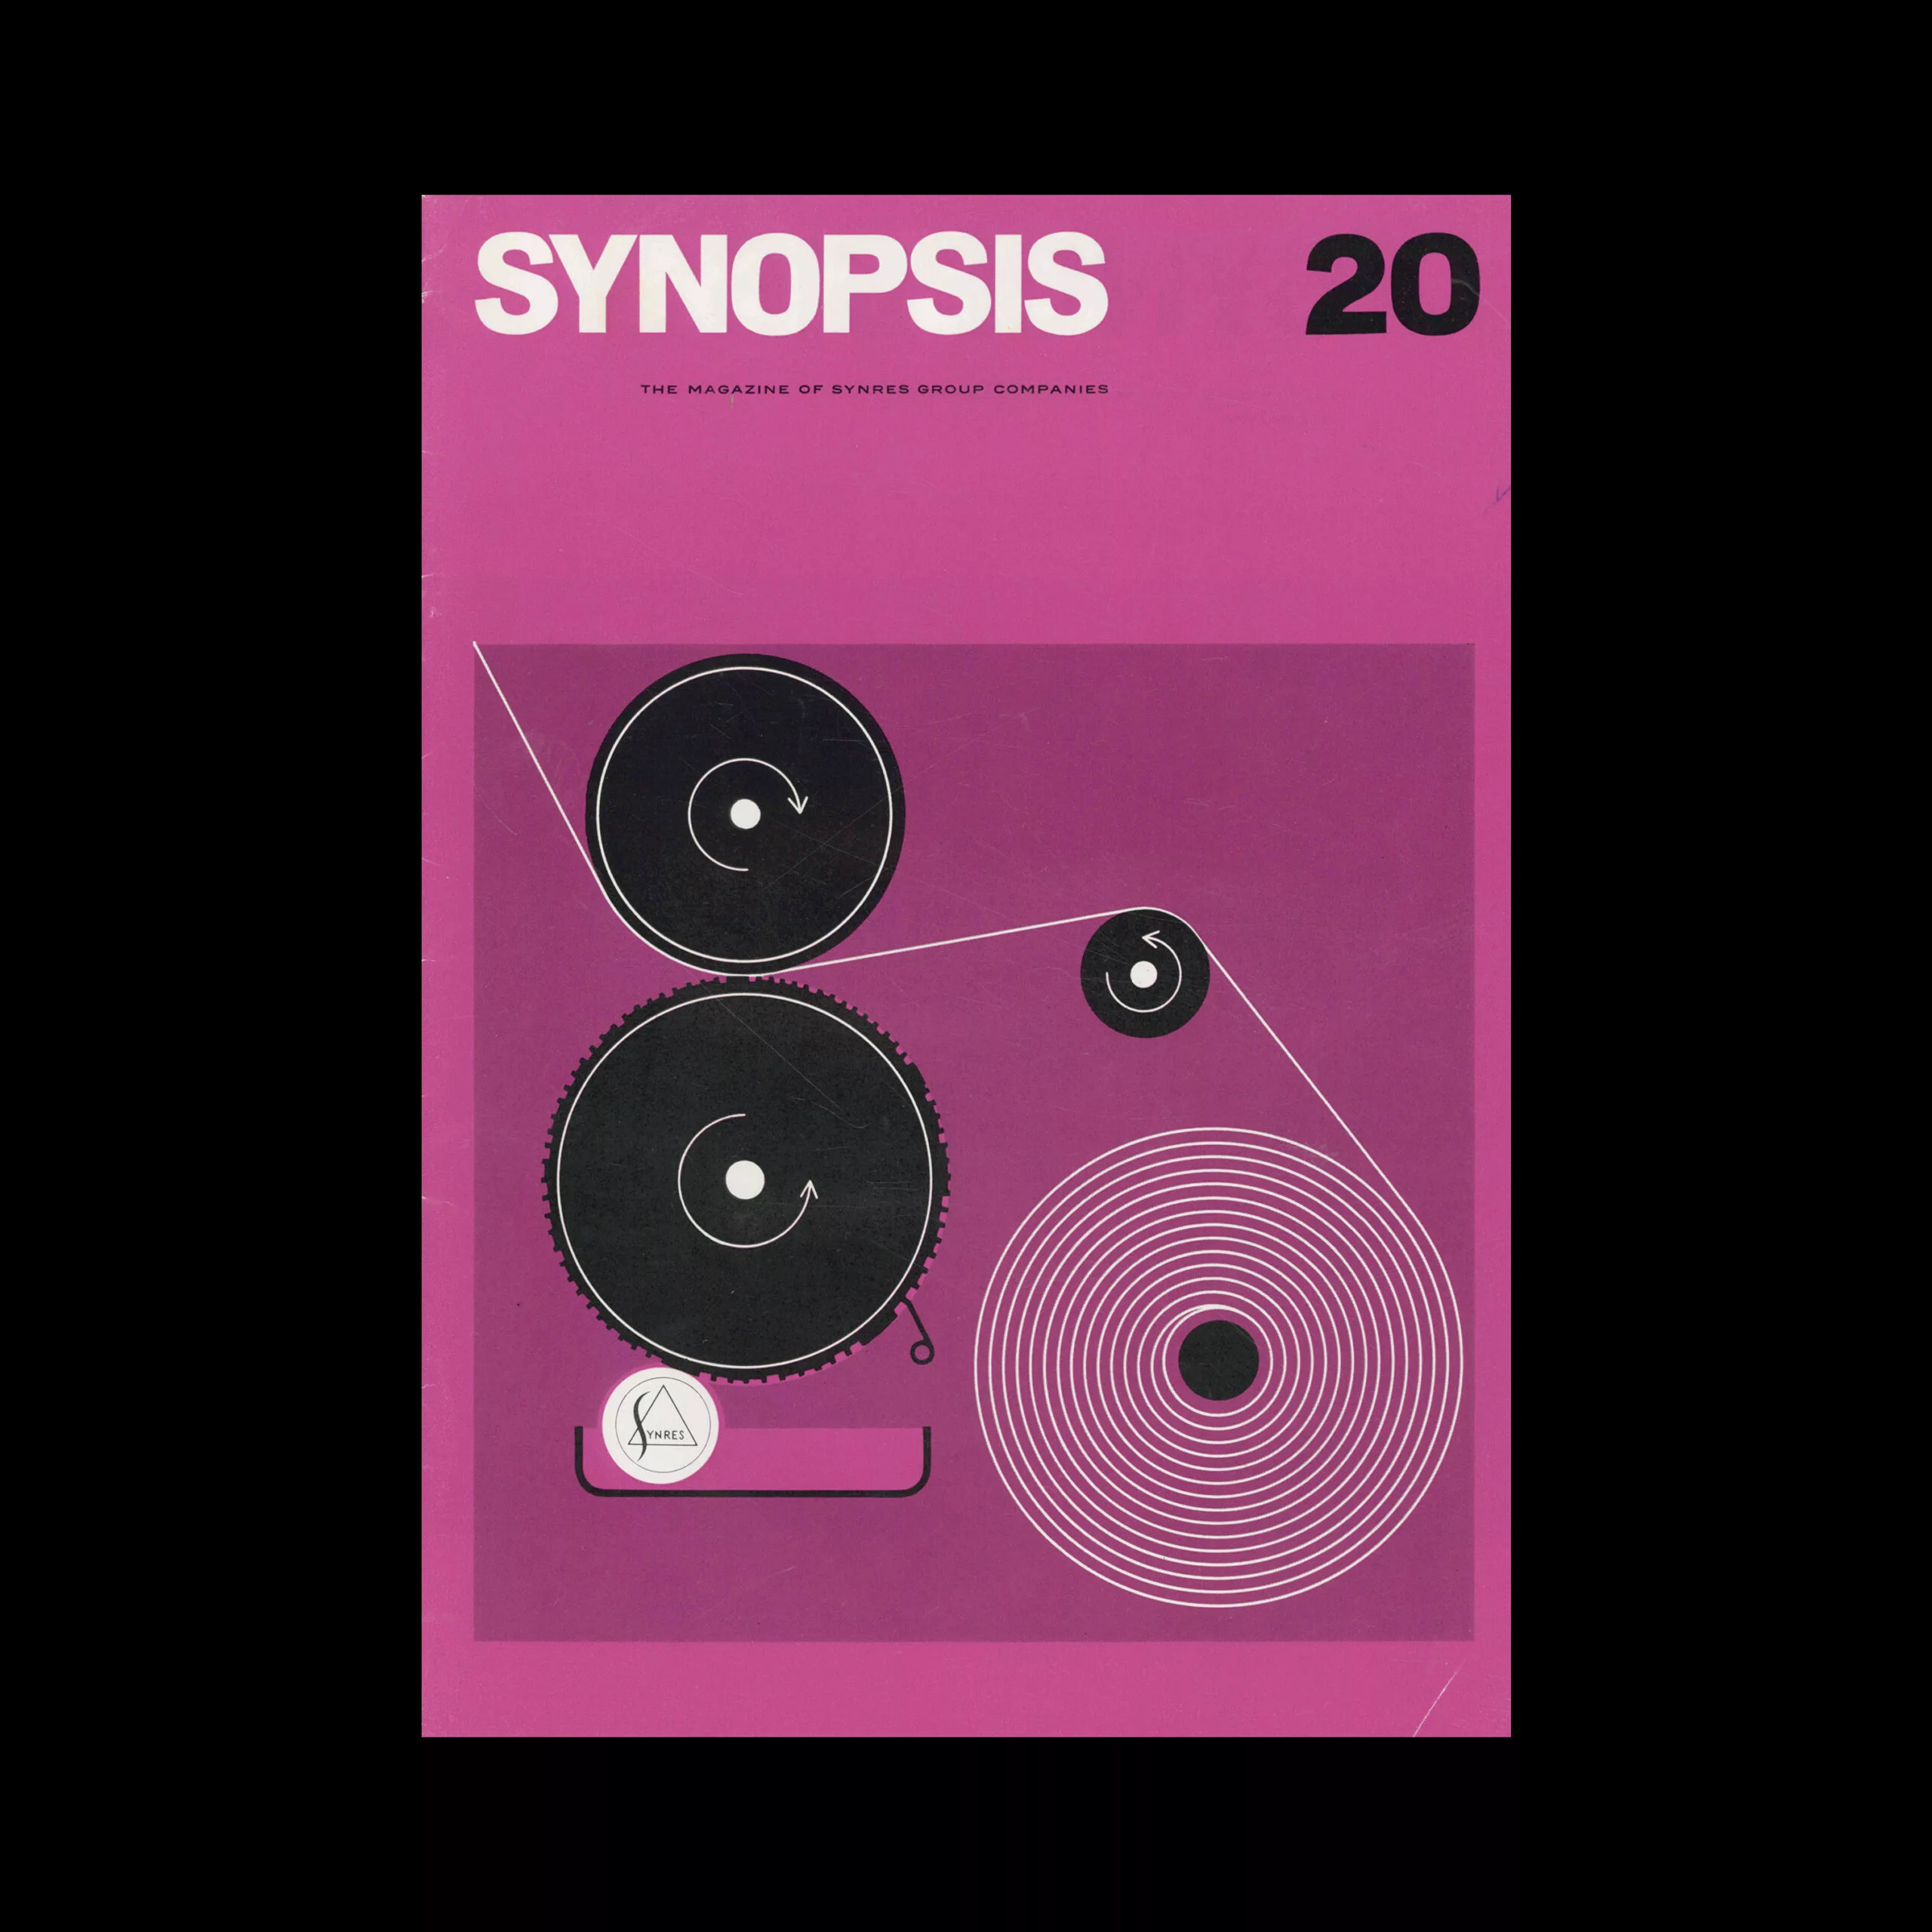 Synopsis 20, The Magazine of Synres Group Companies, 1966. Design and layout by Newman Neame Limited 